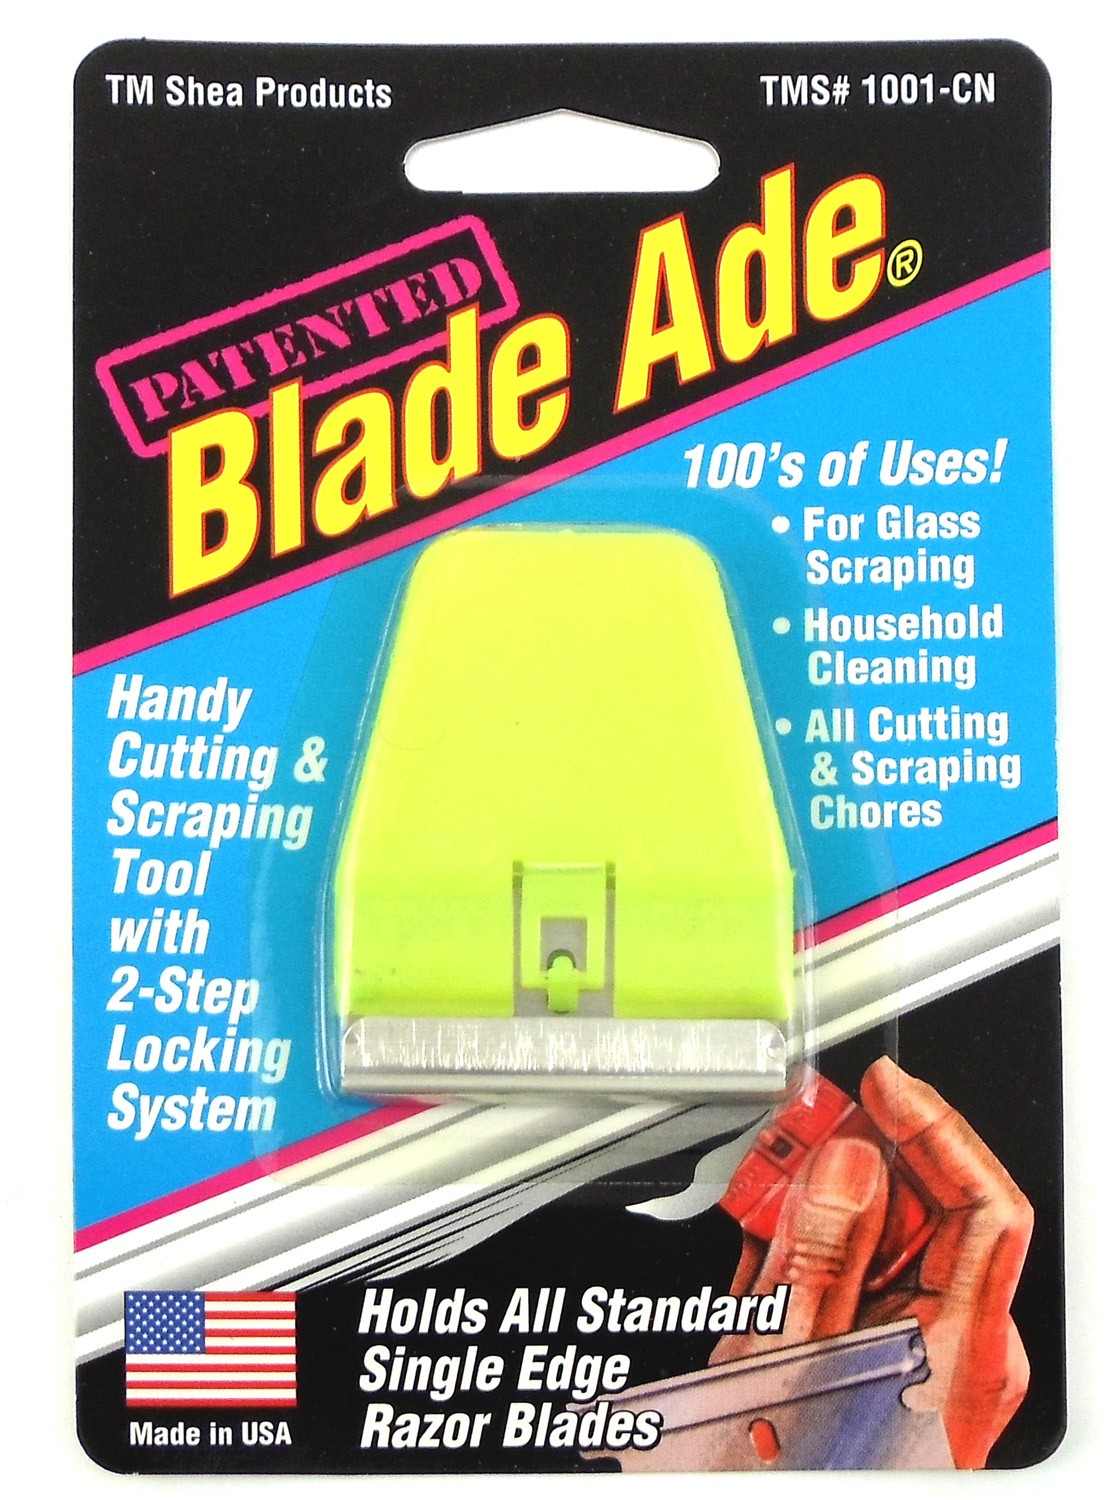 Blade-Ade Carded In Display Box